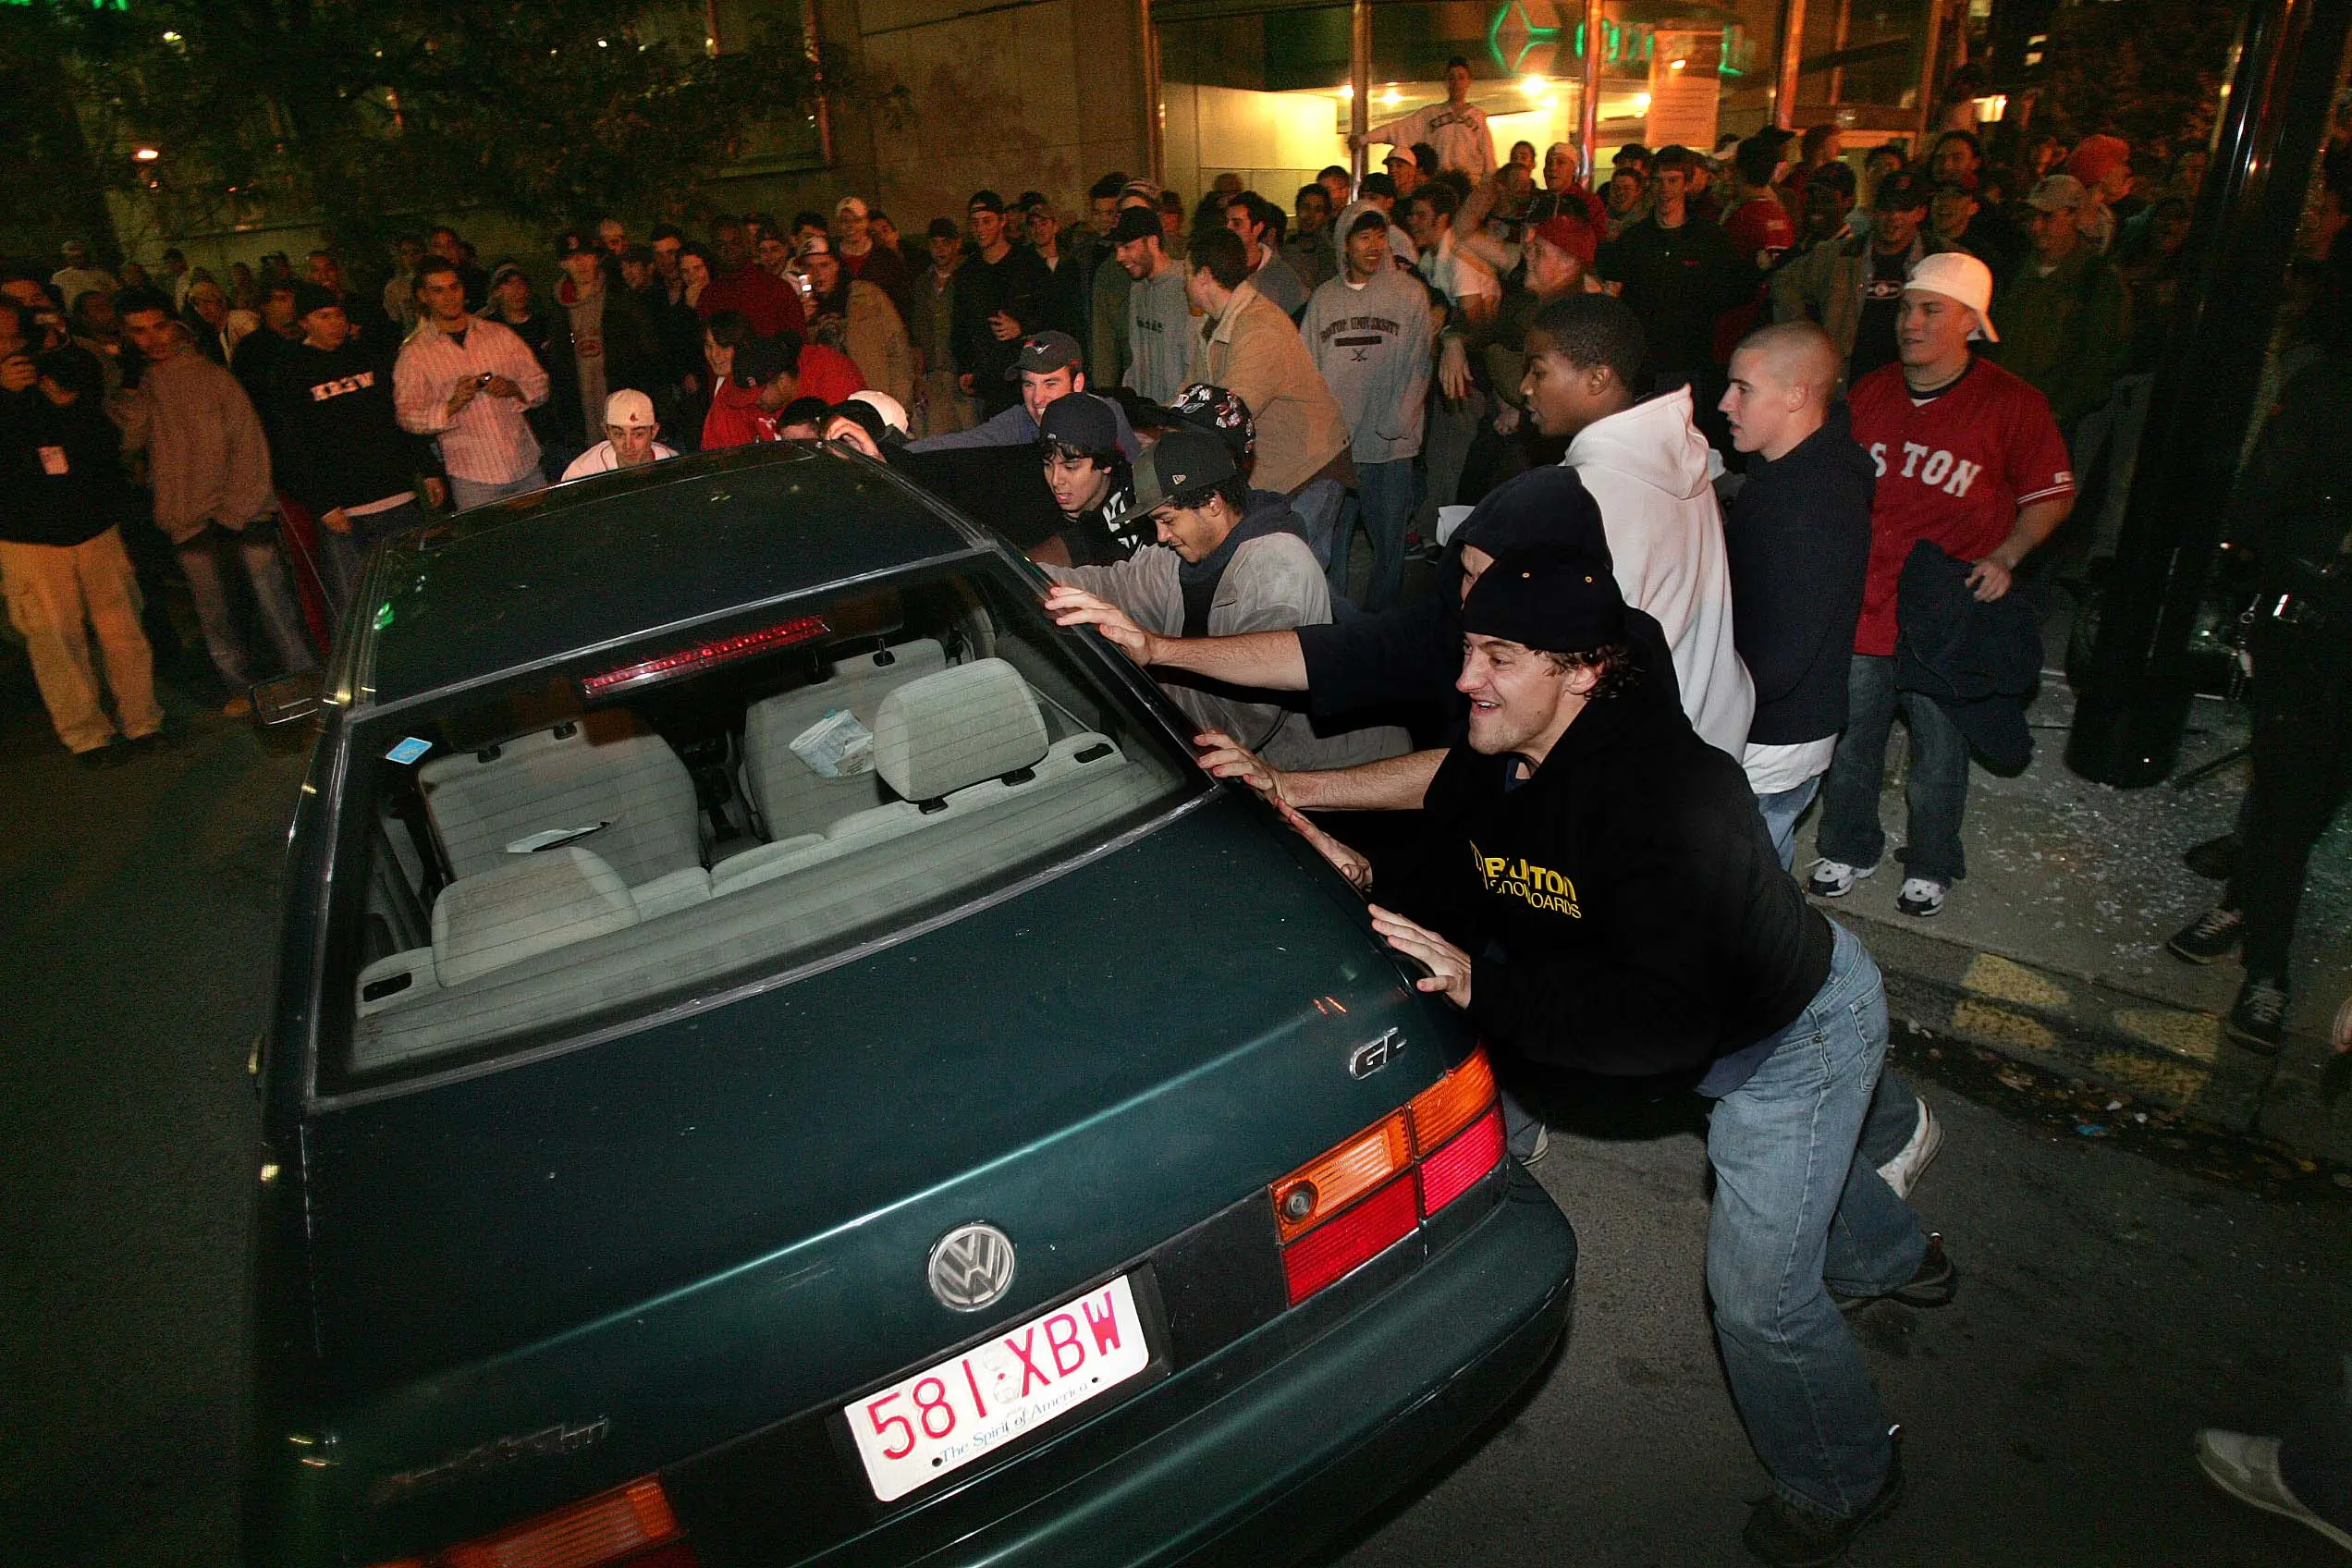 A group of men attempt to roll over a car in Kenmore Square after the Red Sox victory.